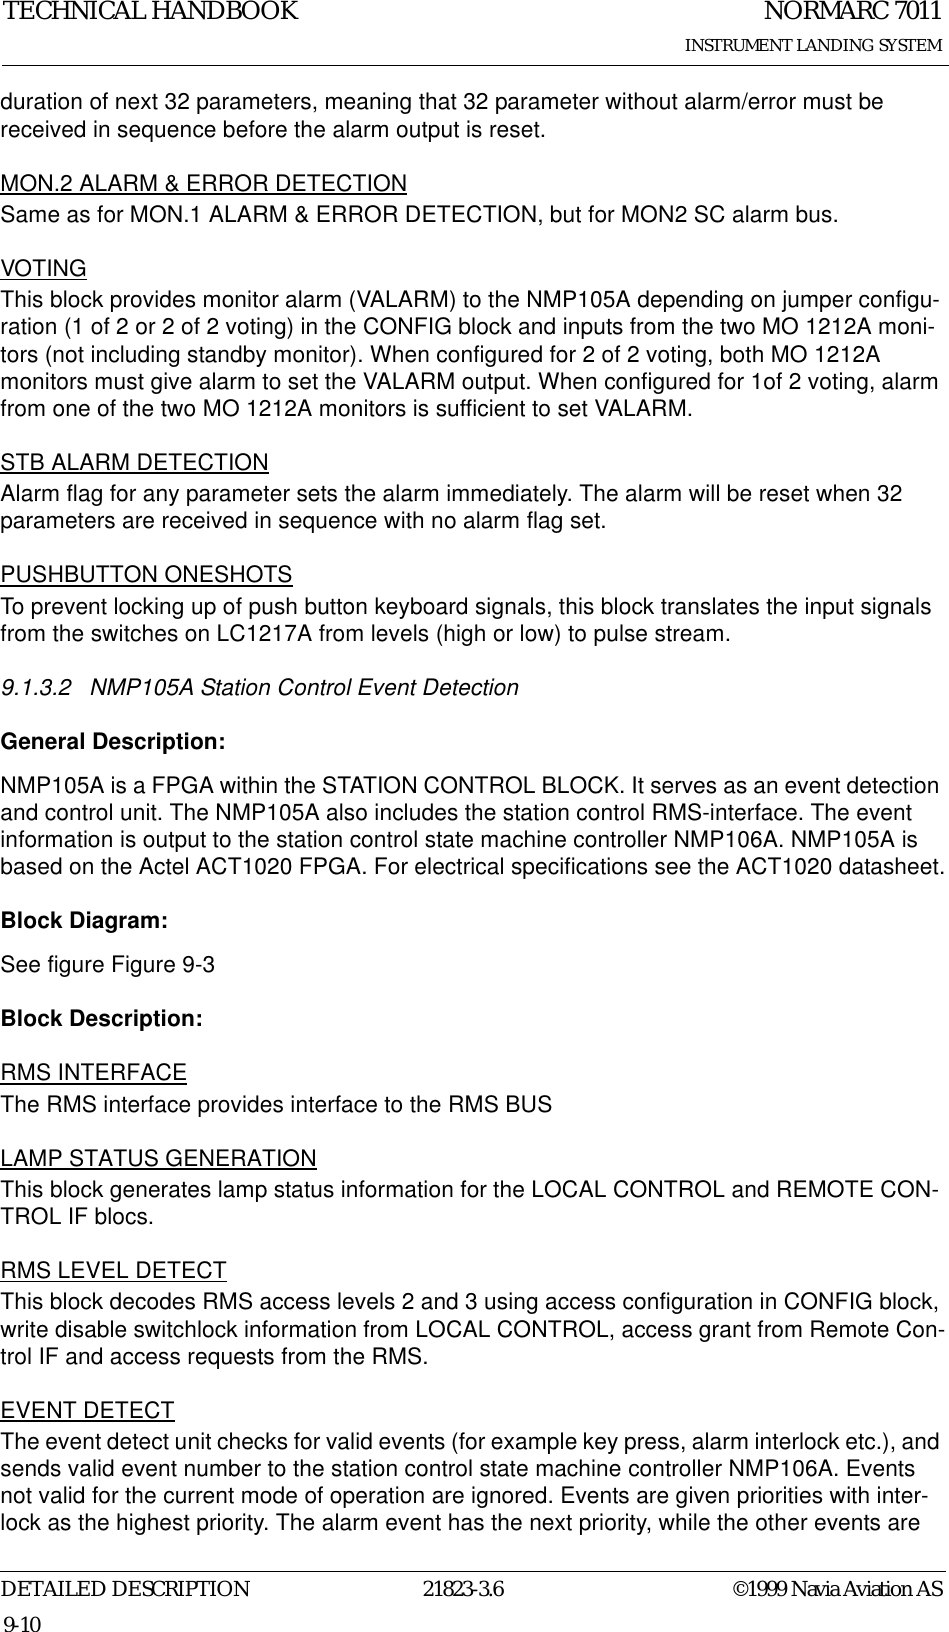 NORMARC 7011INSTRUMENT LANDING SYSTEMTECHNICAL HANDBOOKDETAILED DESCRIPTION 21823-3.6 ©1999 Navia Aviation AS9-10duration of next 32 parameters, meaning that 32 parameter without alarm/error must be received in sequence before the alarm output is reset.MON.2 ALARM &amp; ERROR DETECTIONSame as for MON.1 ALARM &amp; ERROR DETECTION, but for MON2 SC alarm bus.VOTINGThis block provides monitor alarm (VALARM) to the NMP105A depending on jumper configu-ration (1 of 2 or 2 of 2 voting) in the CONFIG block and inputs from the two MO 1212A moni-tors (not including standby monitor). When configured for 2 of 2 voting, both MO 1212A monitors must give alarm to set the VALARM output. When configured for 1of 2 voting, alarm from one of the two MO 1212A monitors is sufficient to set VALARM.STB ALARM DETECTIONAlarm flag for any parameter sets the alarm immediately. The alarm will be reset when 32 parameters are received in sequence with no alarm flag set.PUSHBUTTON ONESHOTSTo prevent locking up of push button keyboard signals, this block translates the input signals from the switches on LC1217A from levels (high or low) to pulse stream.9.1.3.2 NMP105A Station Control Event DetectionGeneral Description:NMP105A is a FPGA within the STATION CONTROL BLOCK. It serves as an event detection and control unit. The NMP105A also includes the station control RMS-interface. The event information is output to the station control state machine controller NMP106A. NMP105A is based on the Actel ACT1020 FPGA. For electrical specifications see the ACT1020 datasheet.Block Diagram:See figure Figure 9-3 Block Description:RMS INTERFACEThe RMS interface provides interface to the RMS BUSLAMP STATUS GENERATIONThis block generates lamp status information for the LOCAL CONTROL and REMOTE CON-TROL IF blocs.RMS LEVEL DETECTThis block decodes RMS access levels 2 and 3 using access configuration in CONFIG block, write disable switchlock information from LOCAL CONTROL, access grant from Remote Con-trol IF and access requests from the RMS.EVENT DETECTThe event detect unit checks for valid events (for example key press, alarm interlock etc.), and sends valid event number to the station control state machine controller NMP106A. Events not valid for the current mode of operation are ignored. Events are given priorities with inter-lock as the highest priority. The alarm event has the next priority, while the other events are 